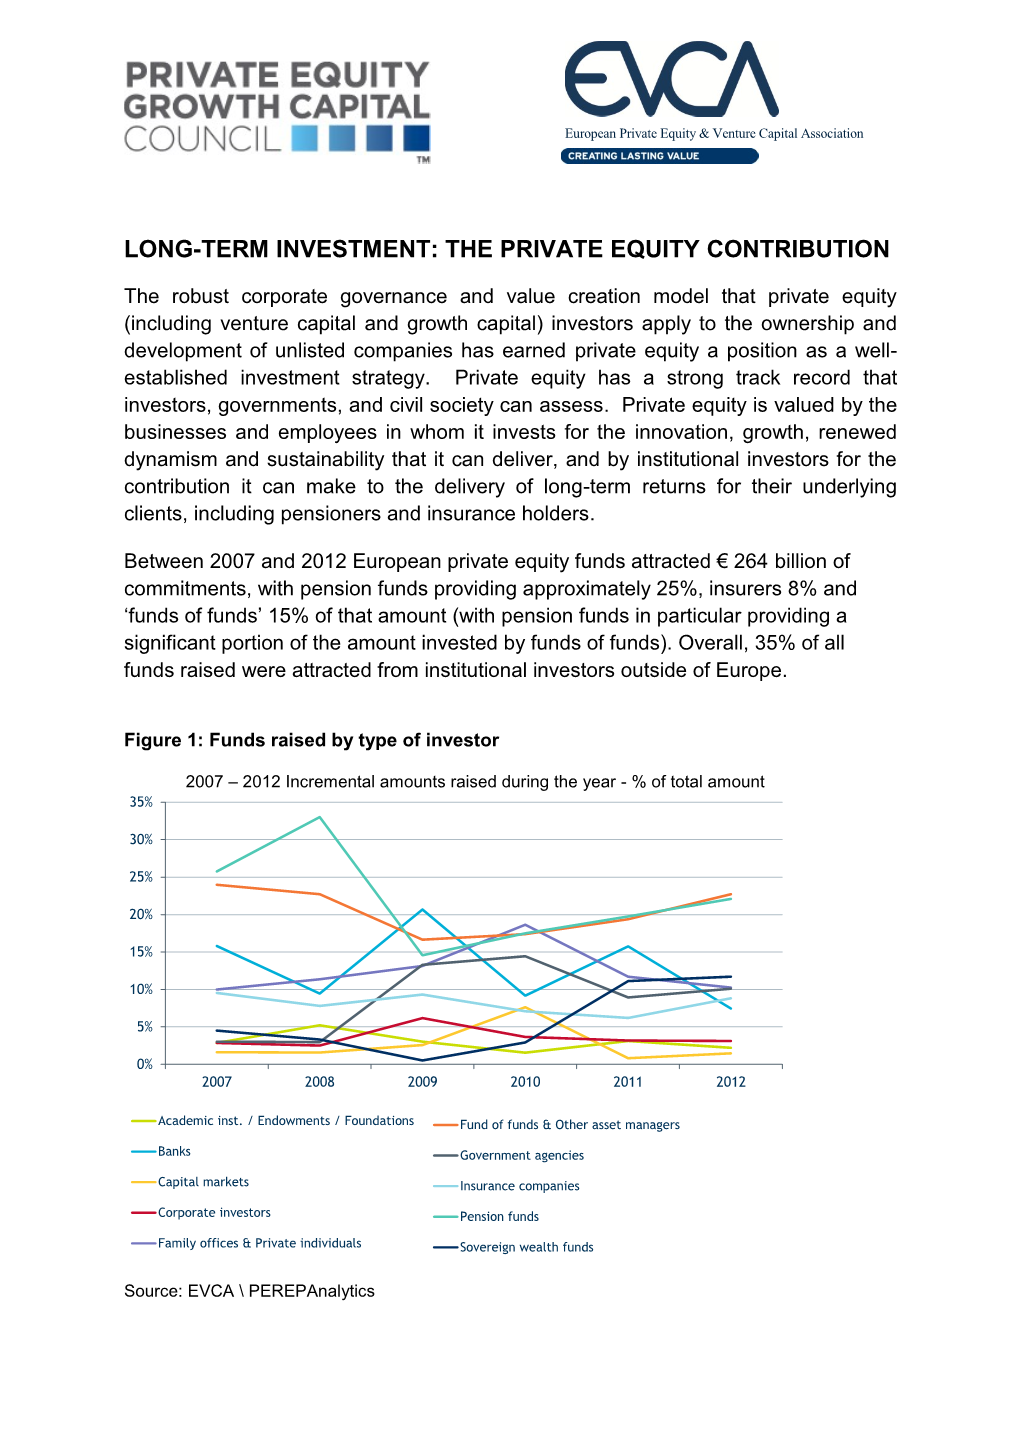 Long-Term Investment: the Private Equity Contribution